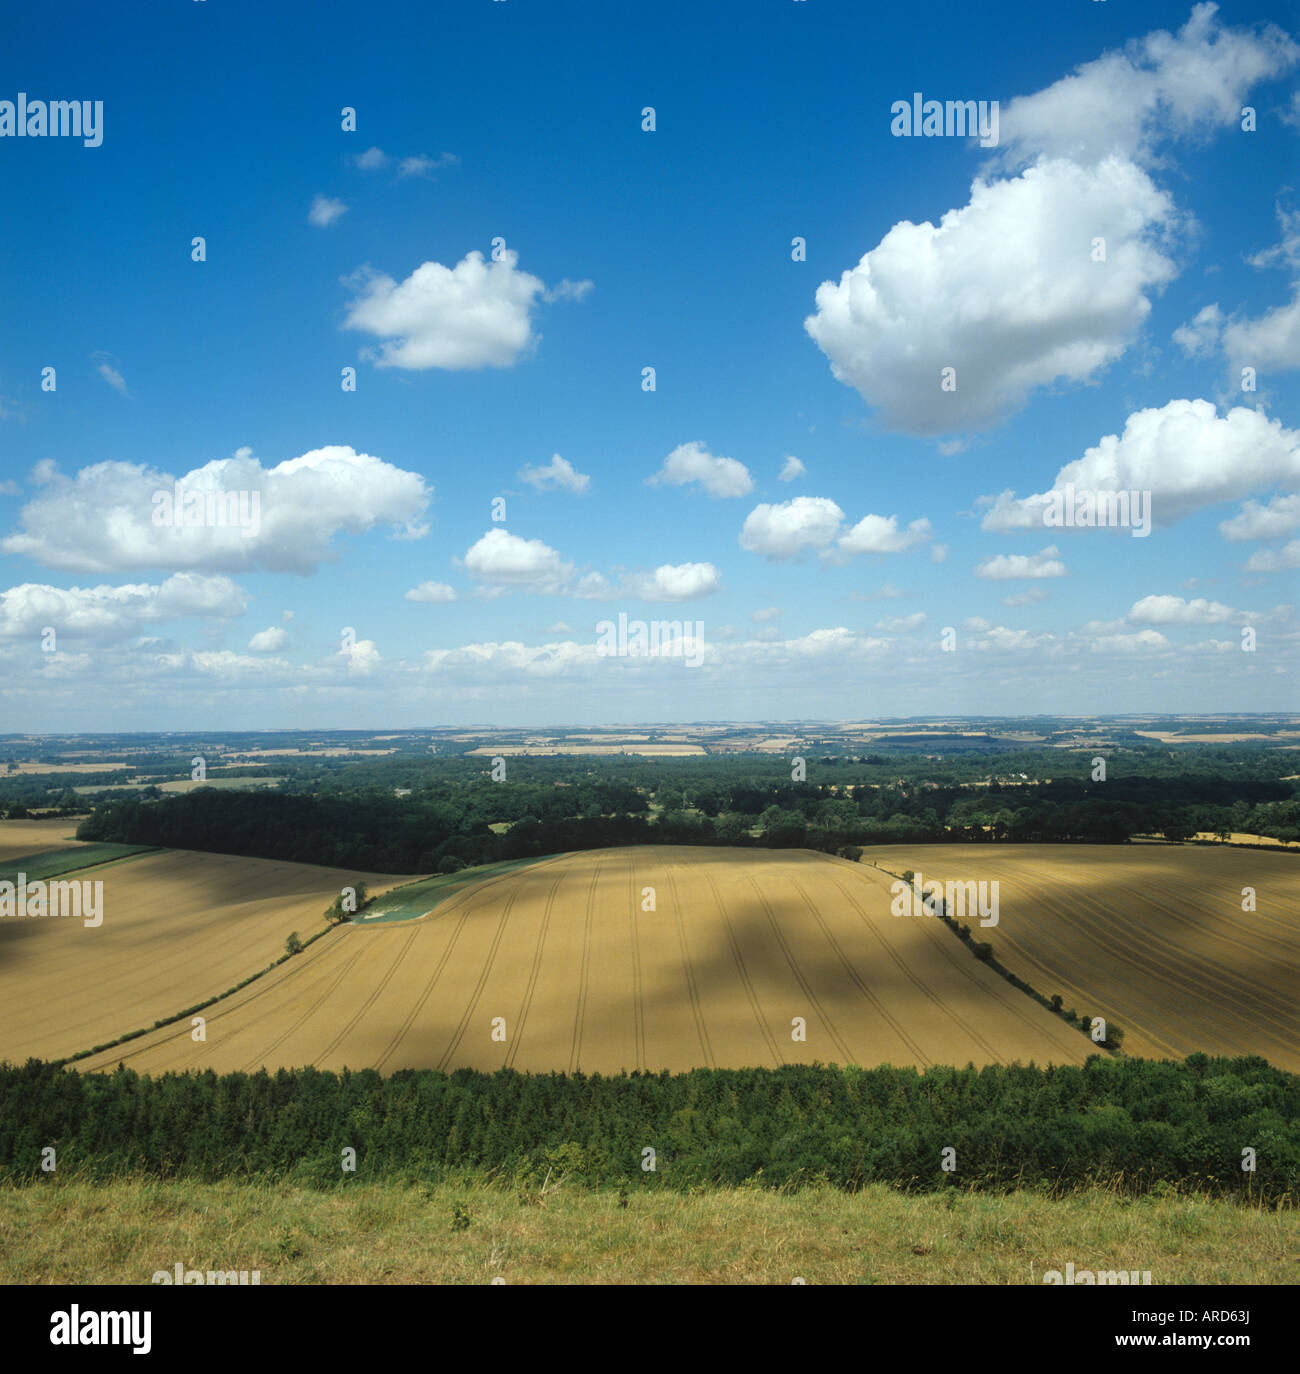 Downland overview of ripe wheat crops and mixed summer landscape with blue sky and clouds Stock Photo